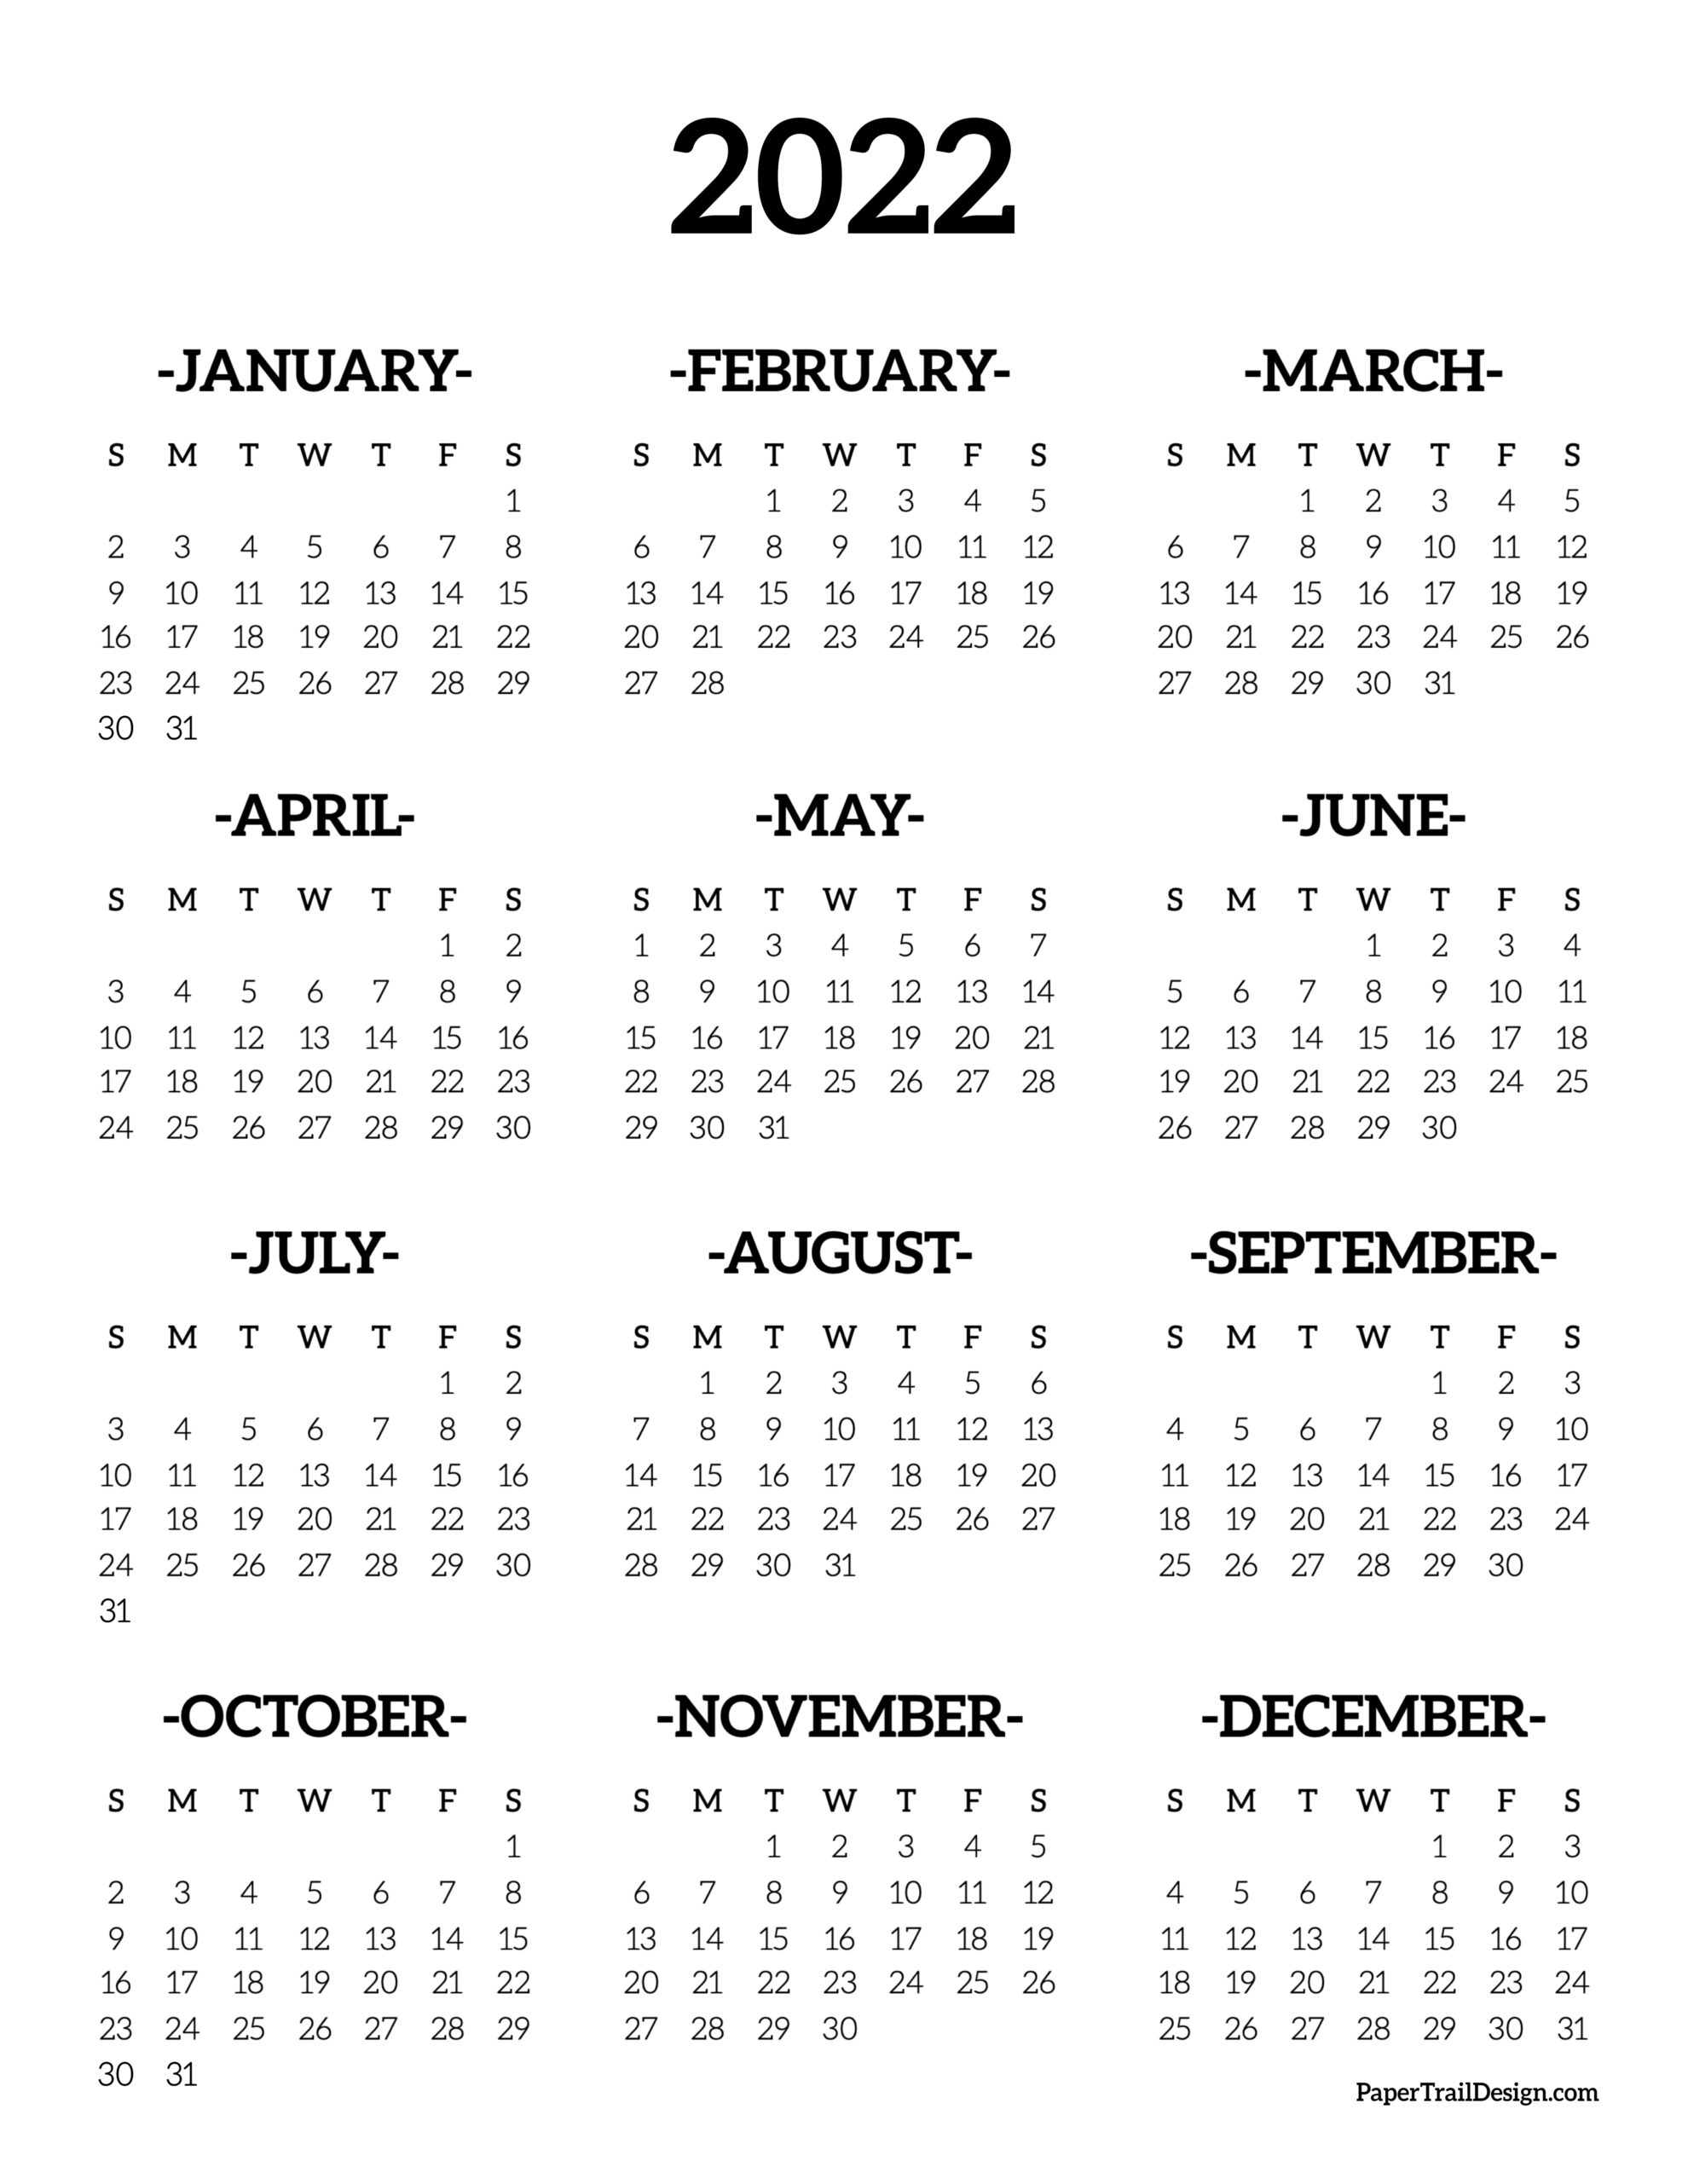 2022 Calendar On One Page Printable.Calendar 2022 Printable One Page Paper Trail Design